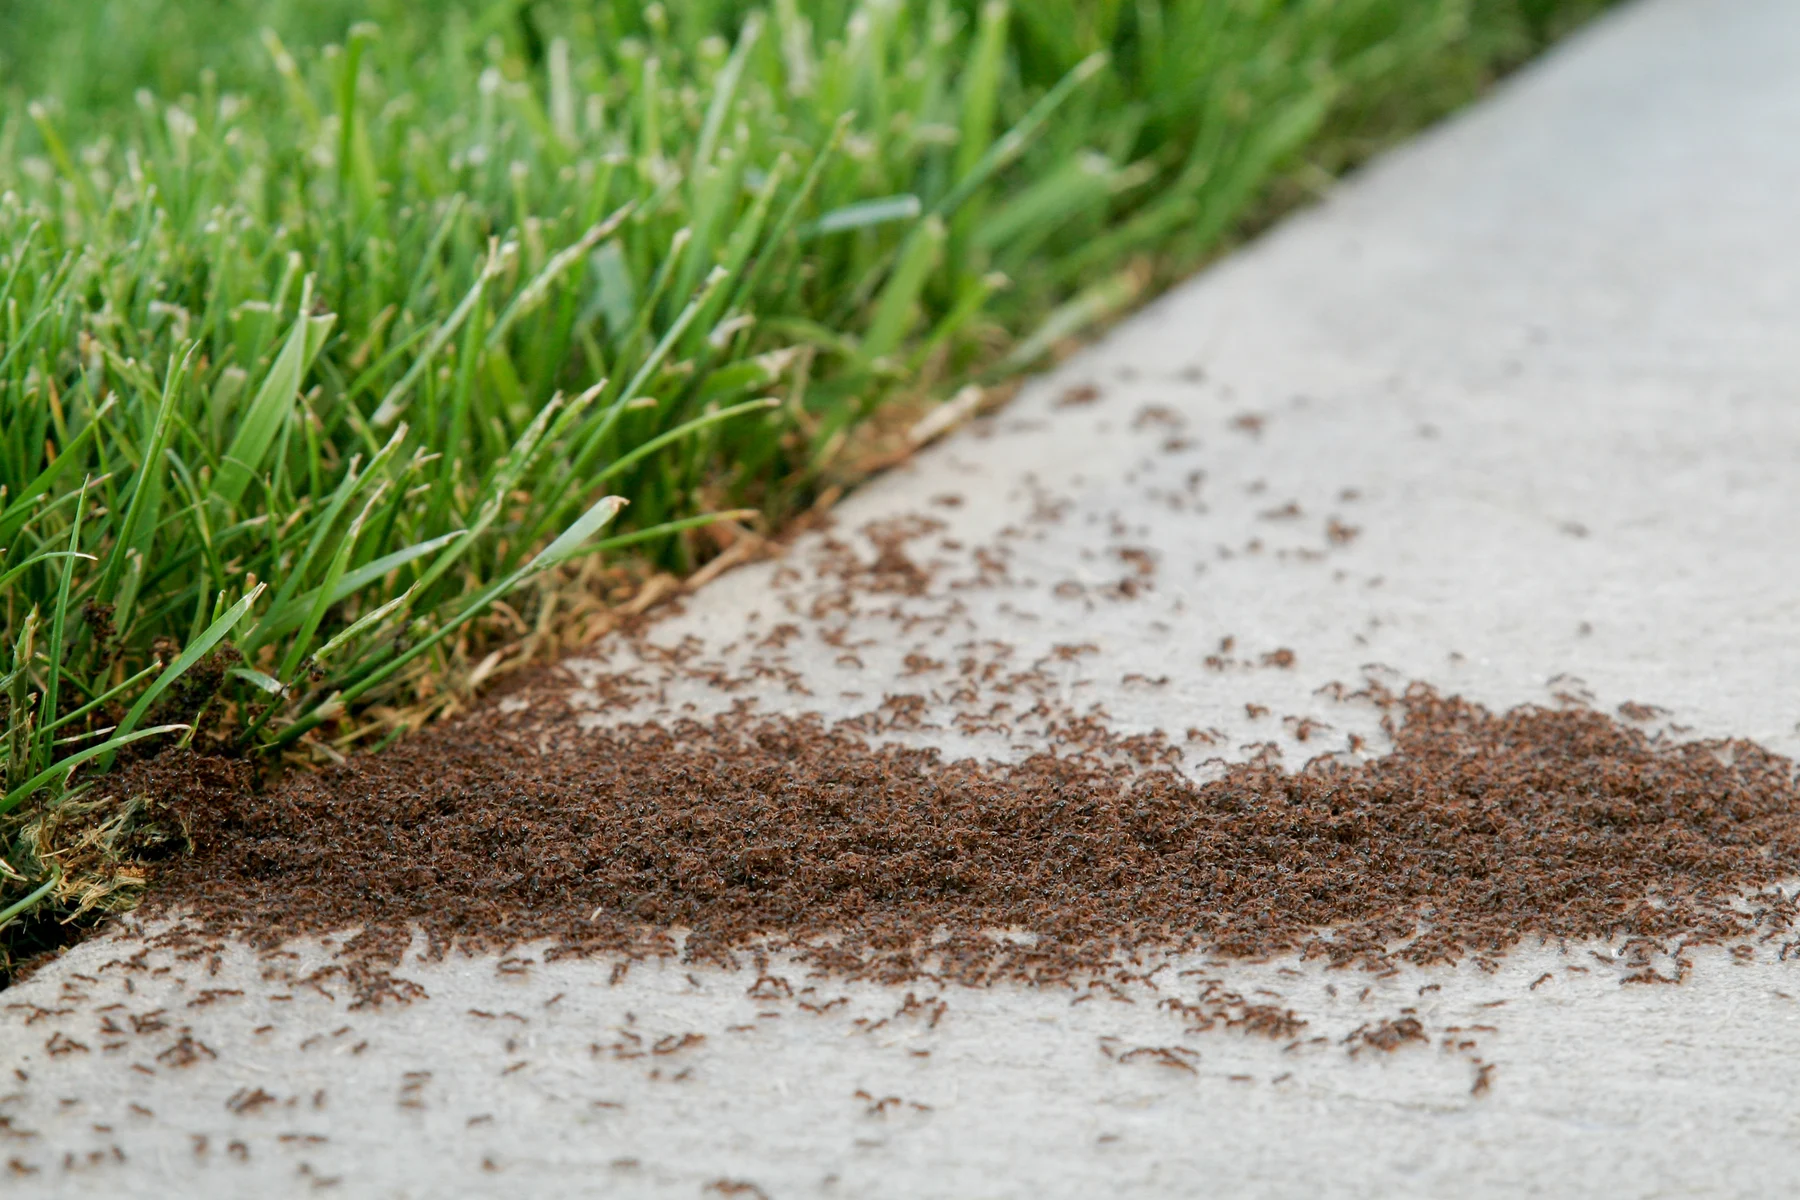 How To Kill Outdoor Ants